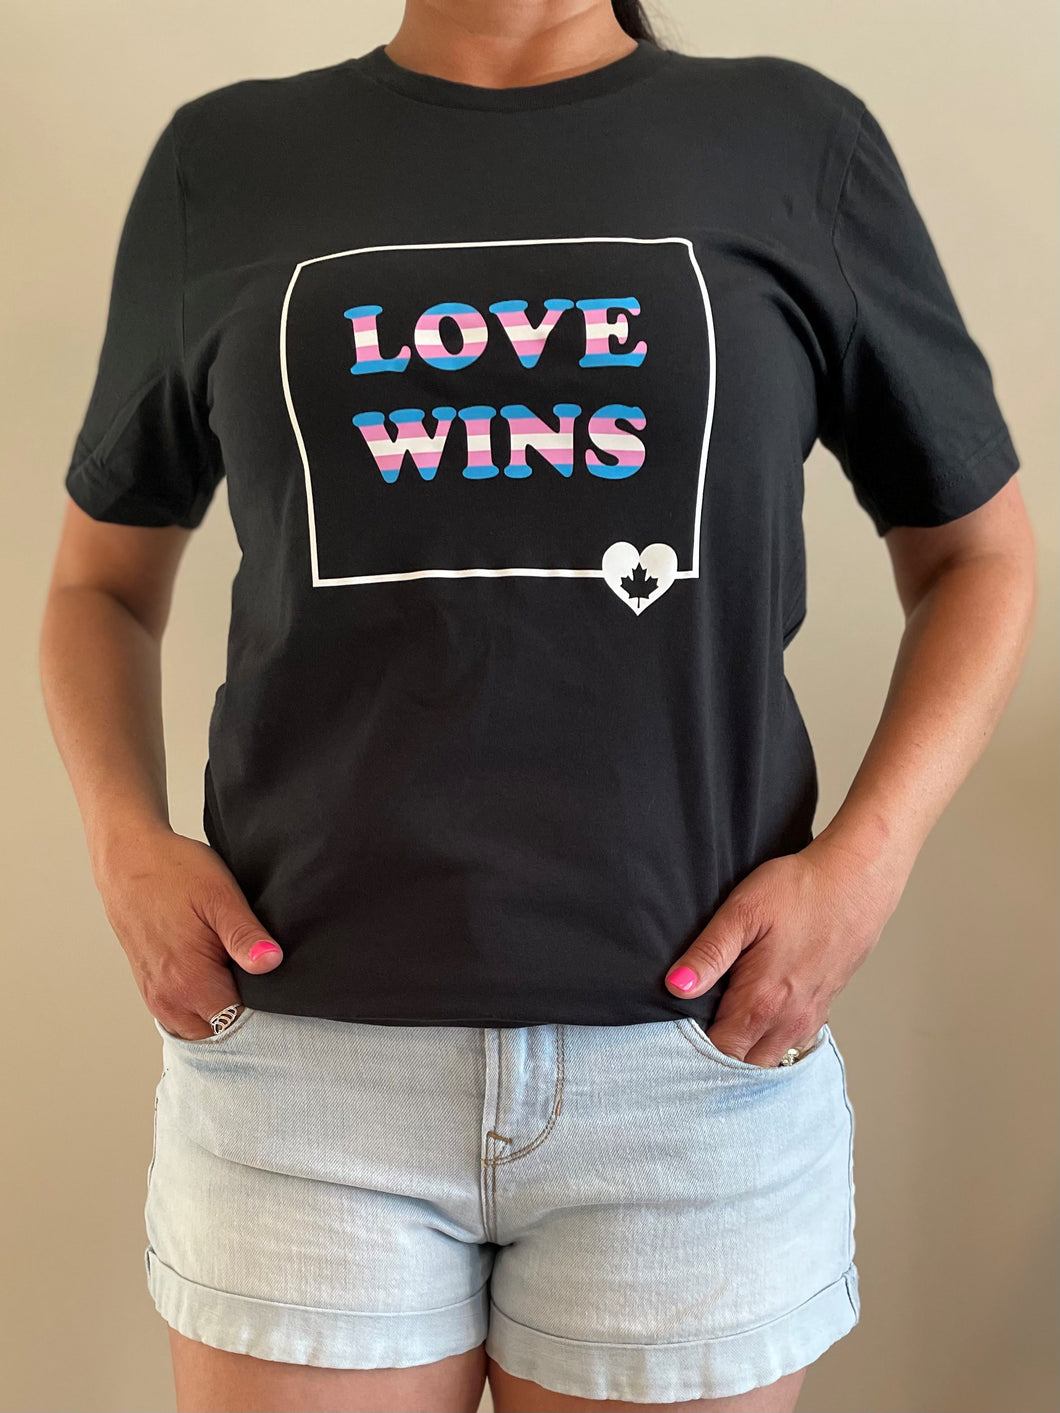 LOVE WINS TRANS TEE - UNISEX (ADULT AND YOUTH SIZES)